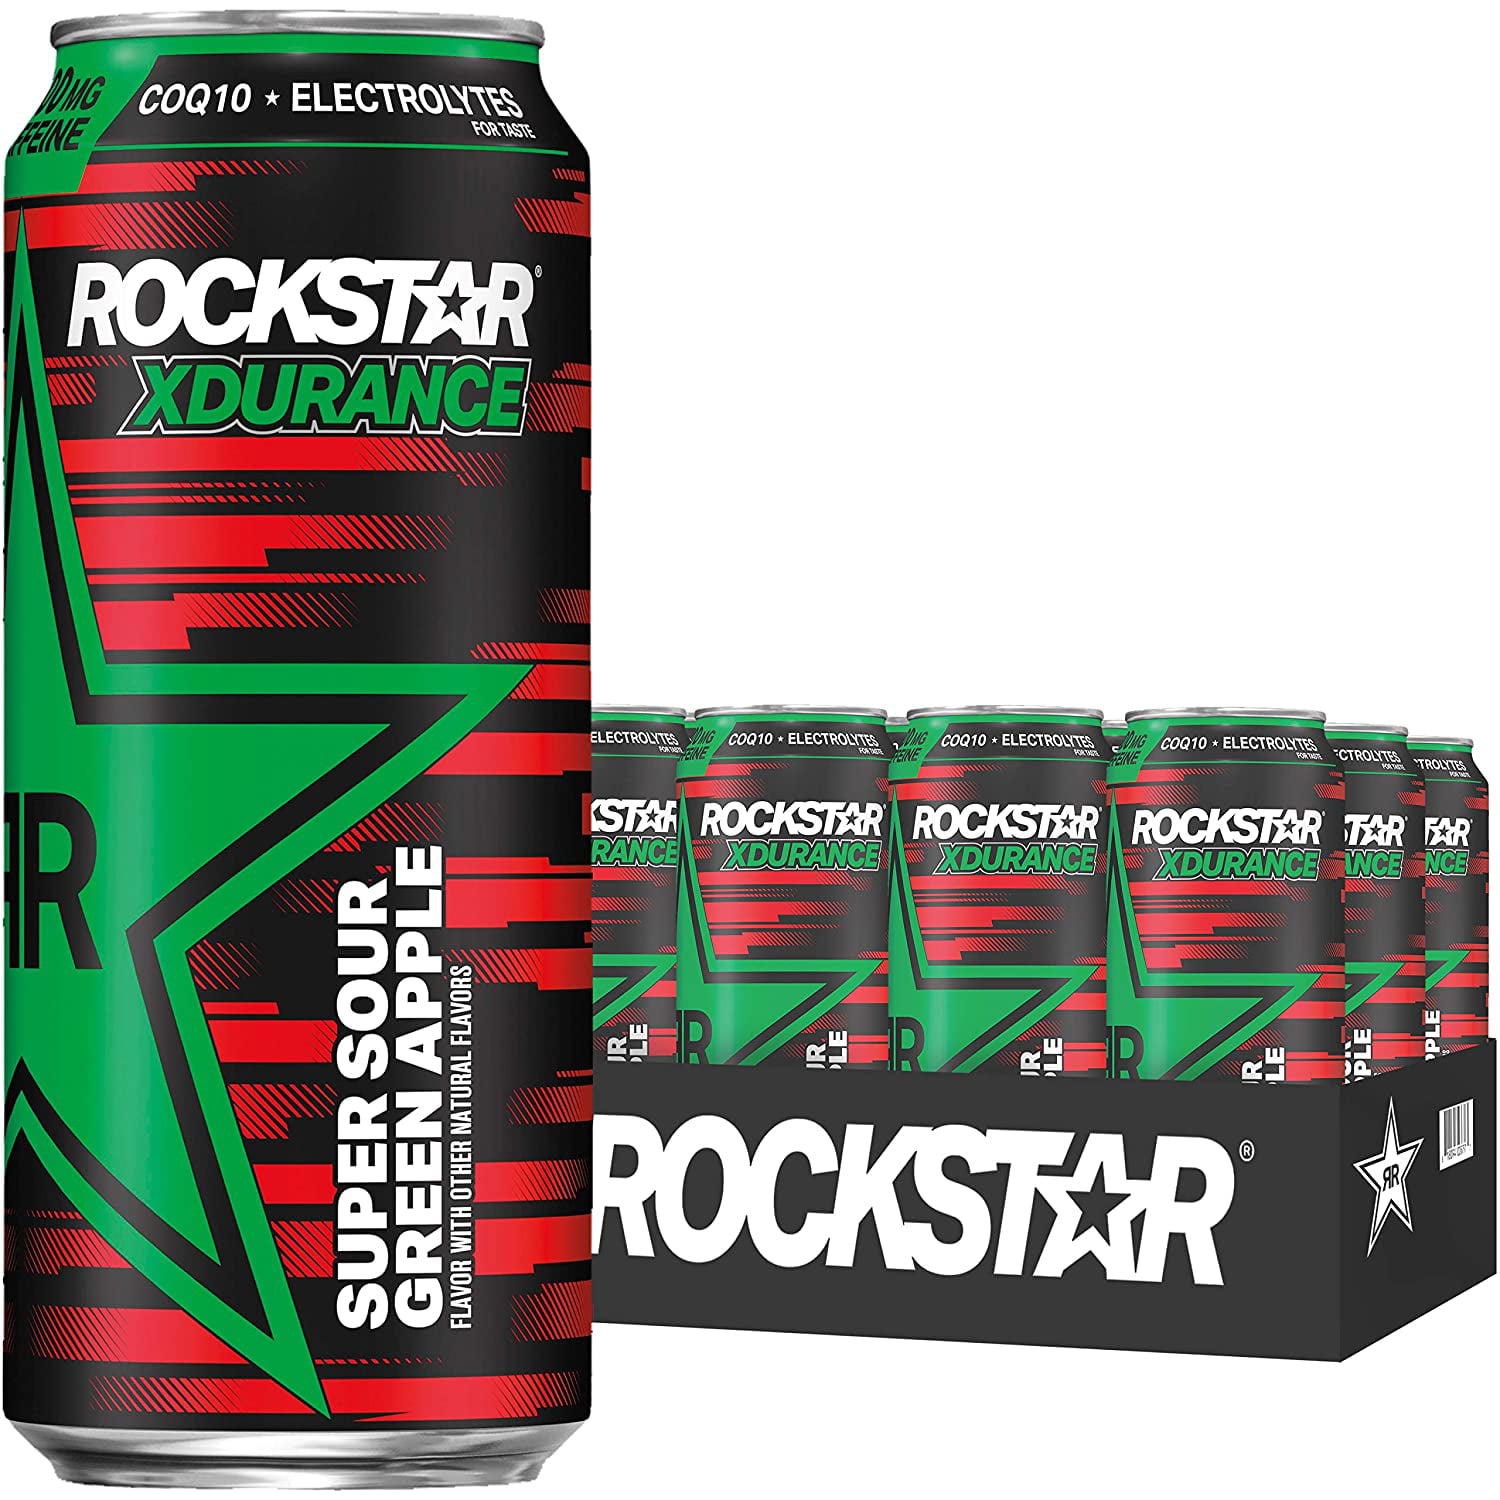 Rockstar Energy Drink Super Green sugar COQ10 and Electrolytes 16oz Cans Pack Packaging May Vary, Xdurance Sour Apple, 12 Count